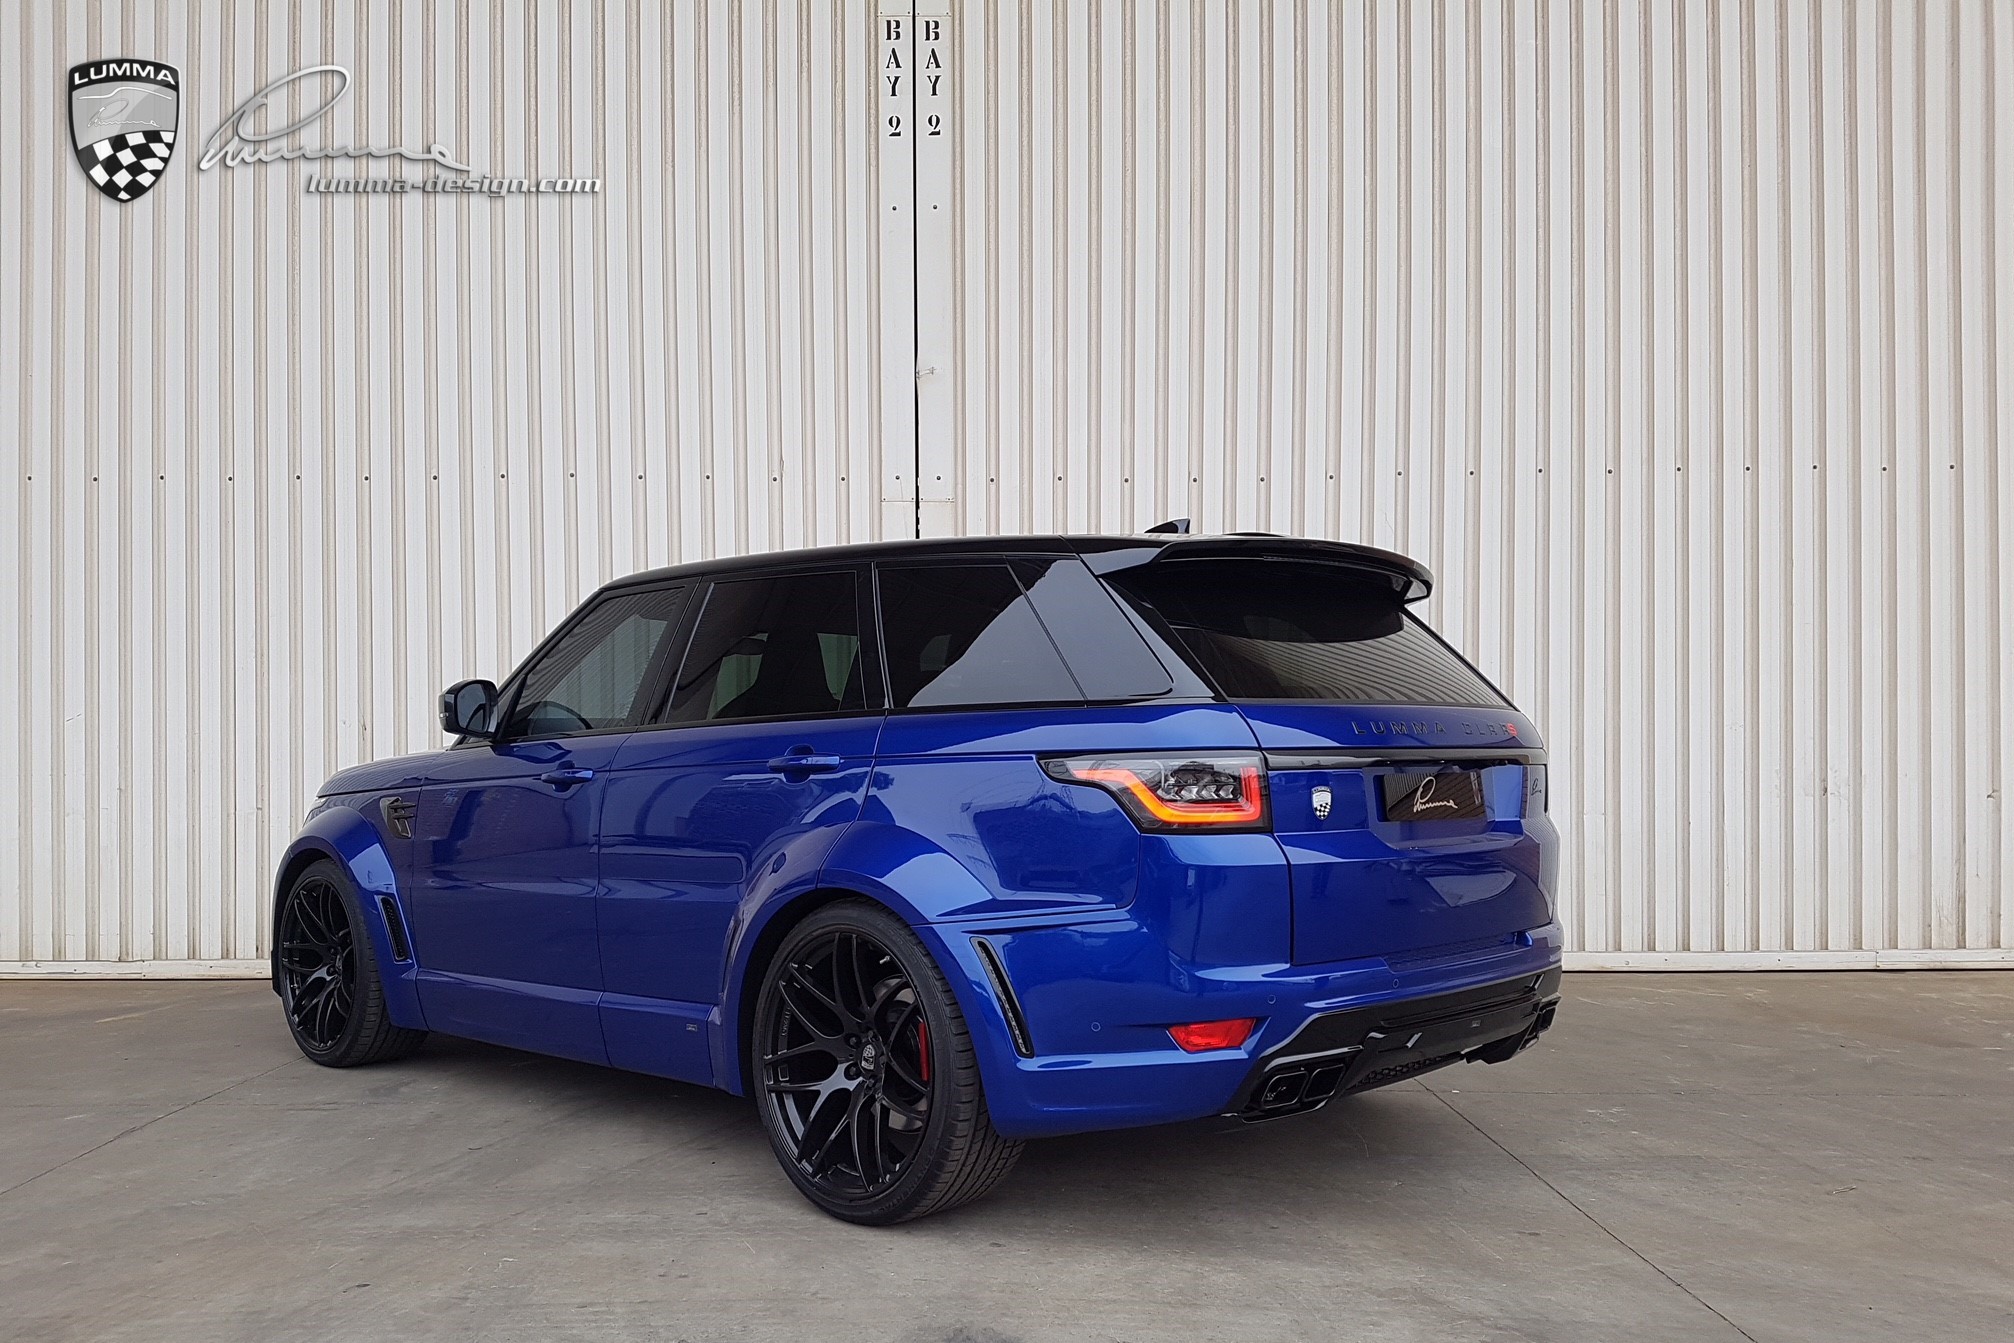 The First Lumma Design 2018 Range Rover SVR Built Right Here In South Africa